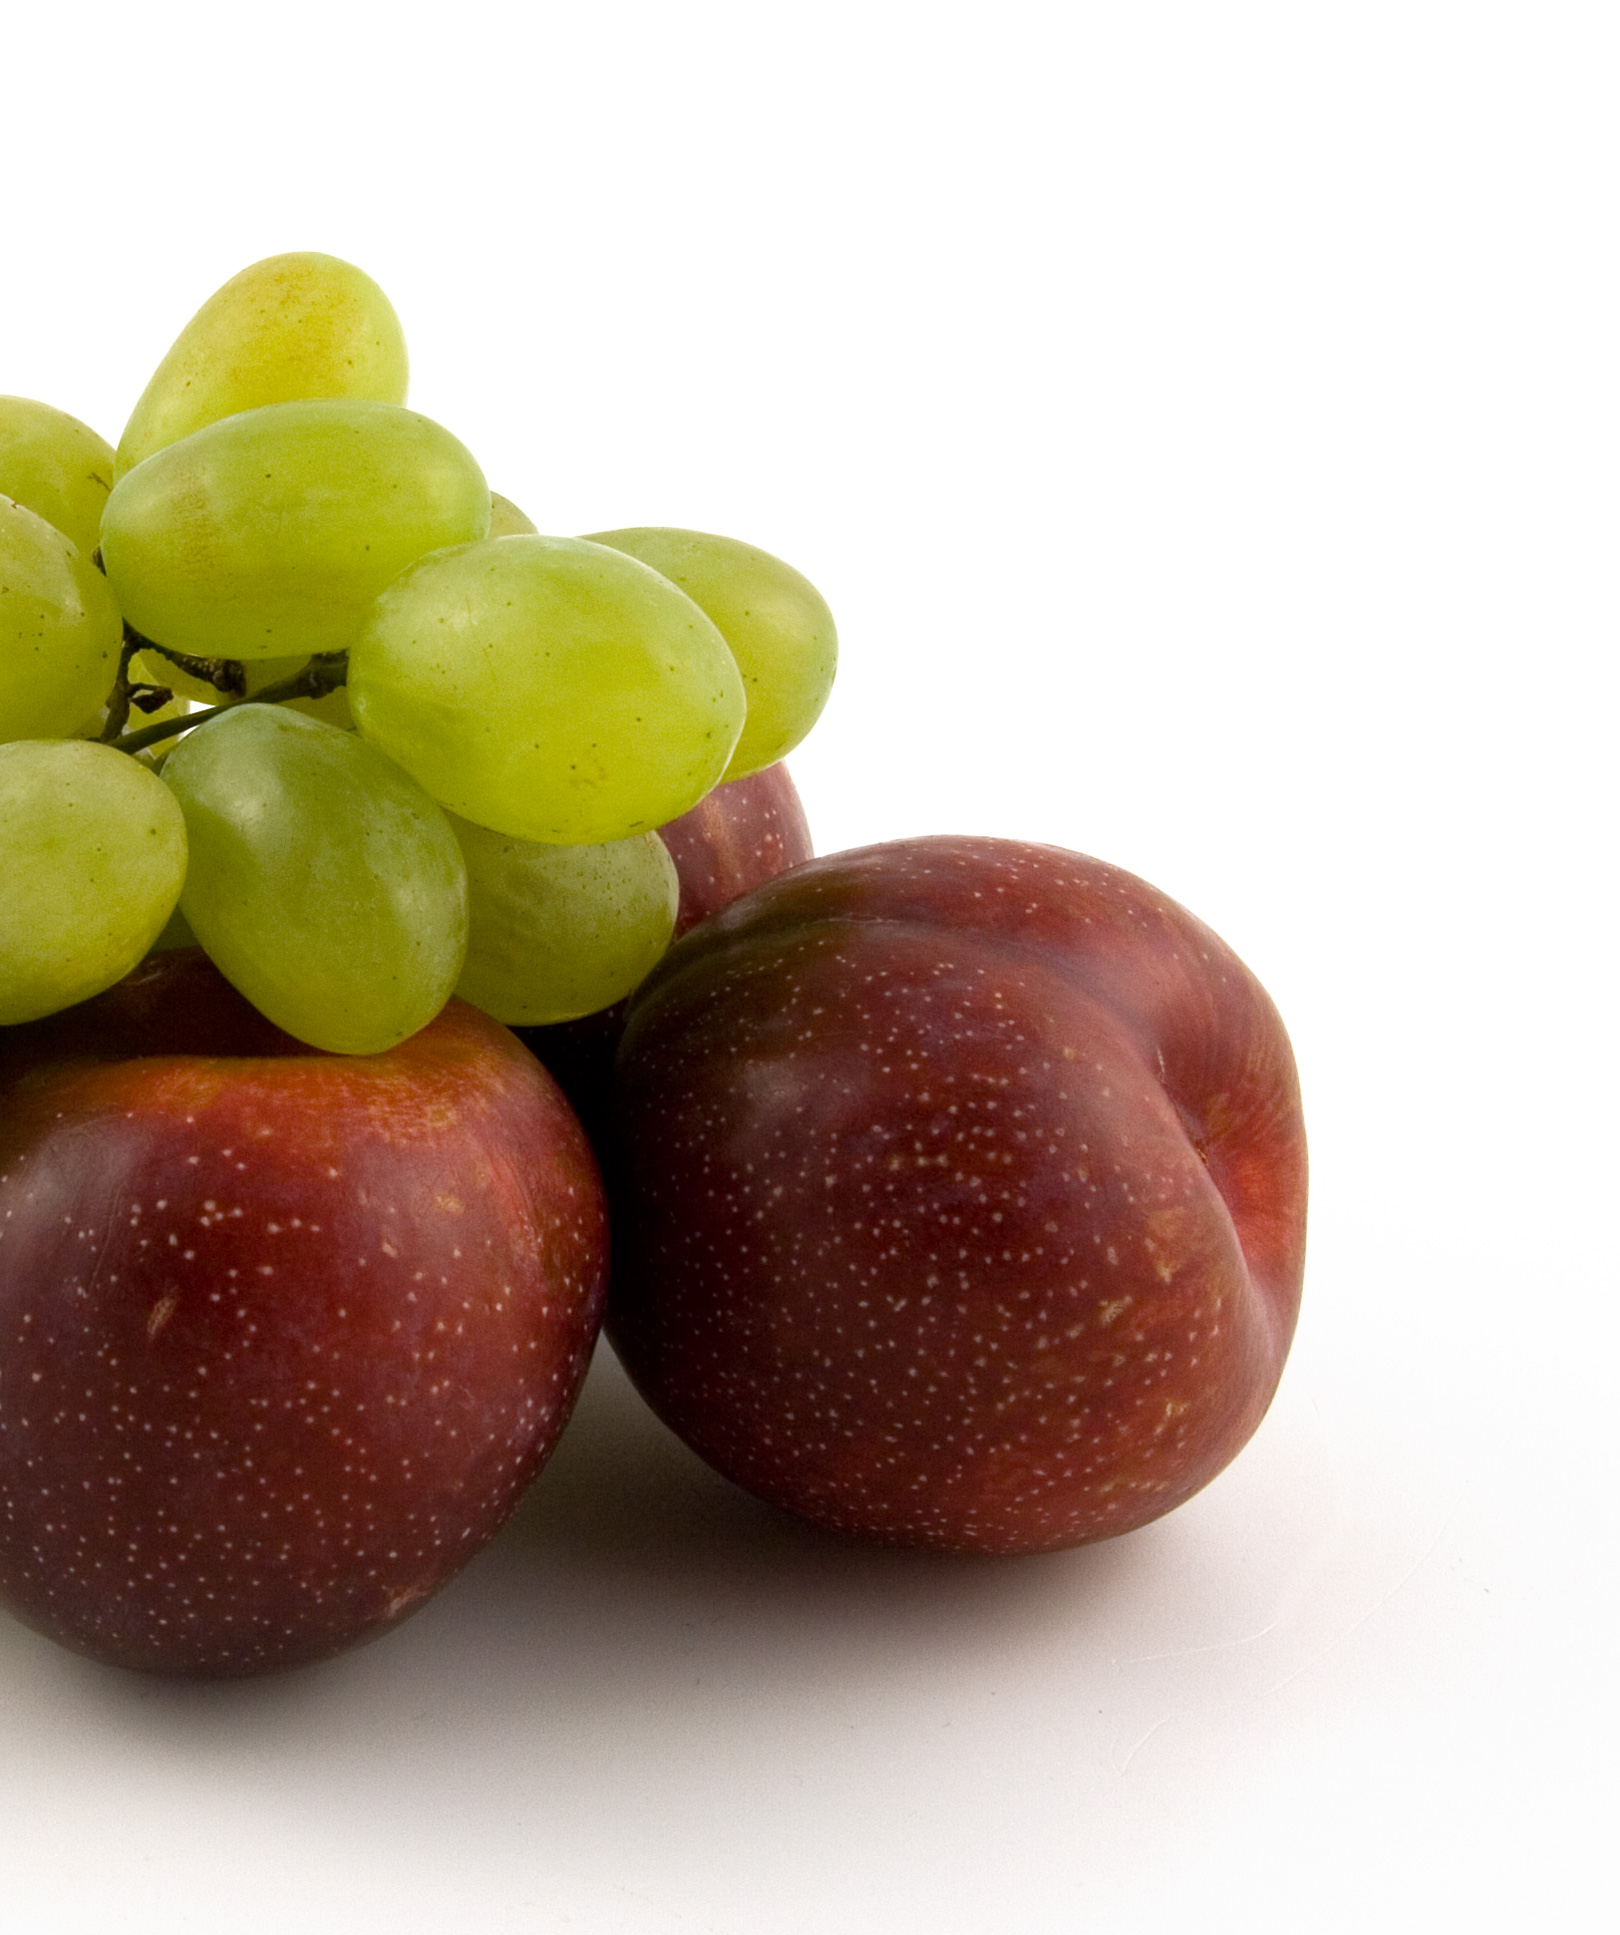 Apples and grapes on whitebackground